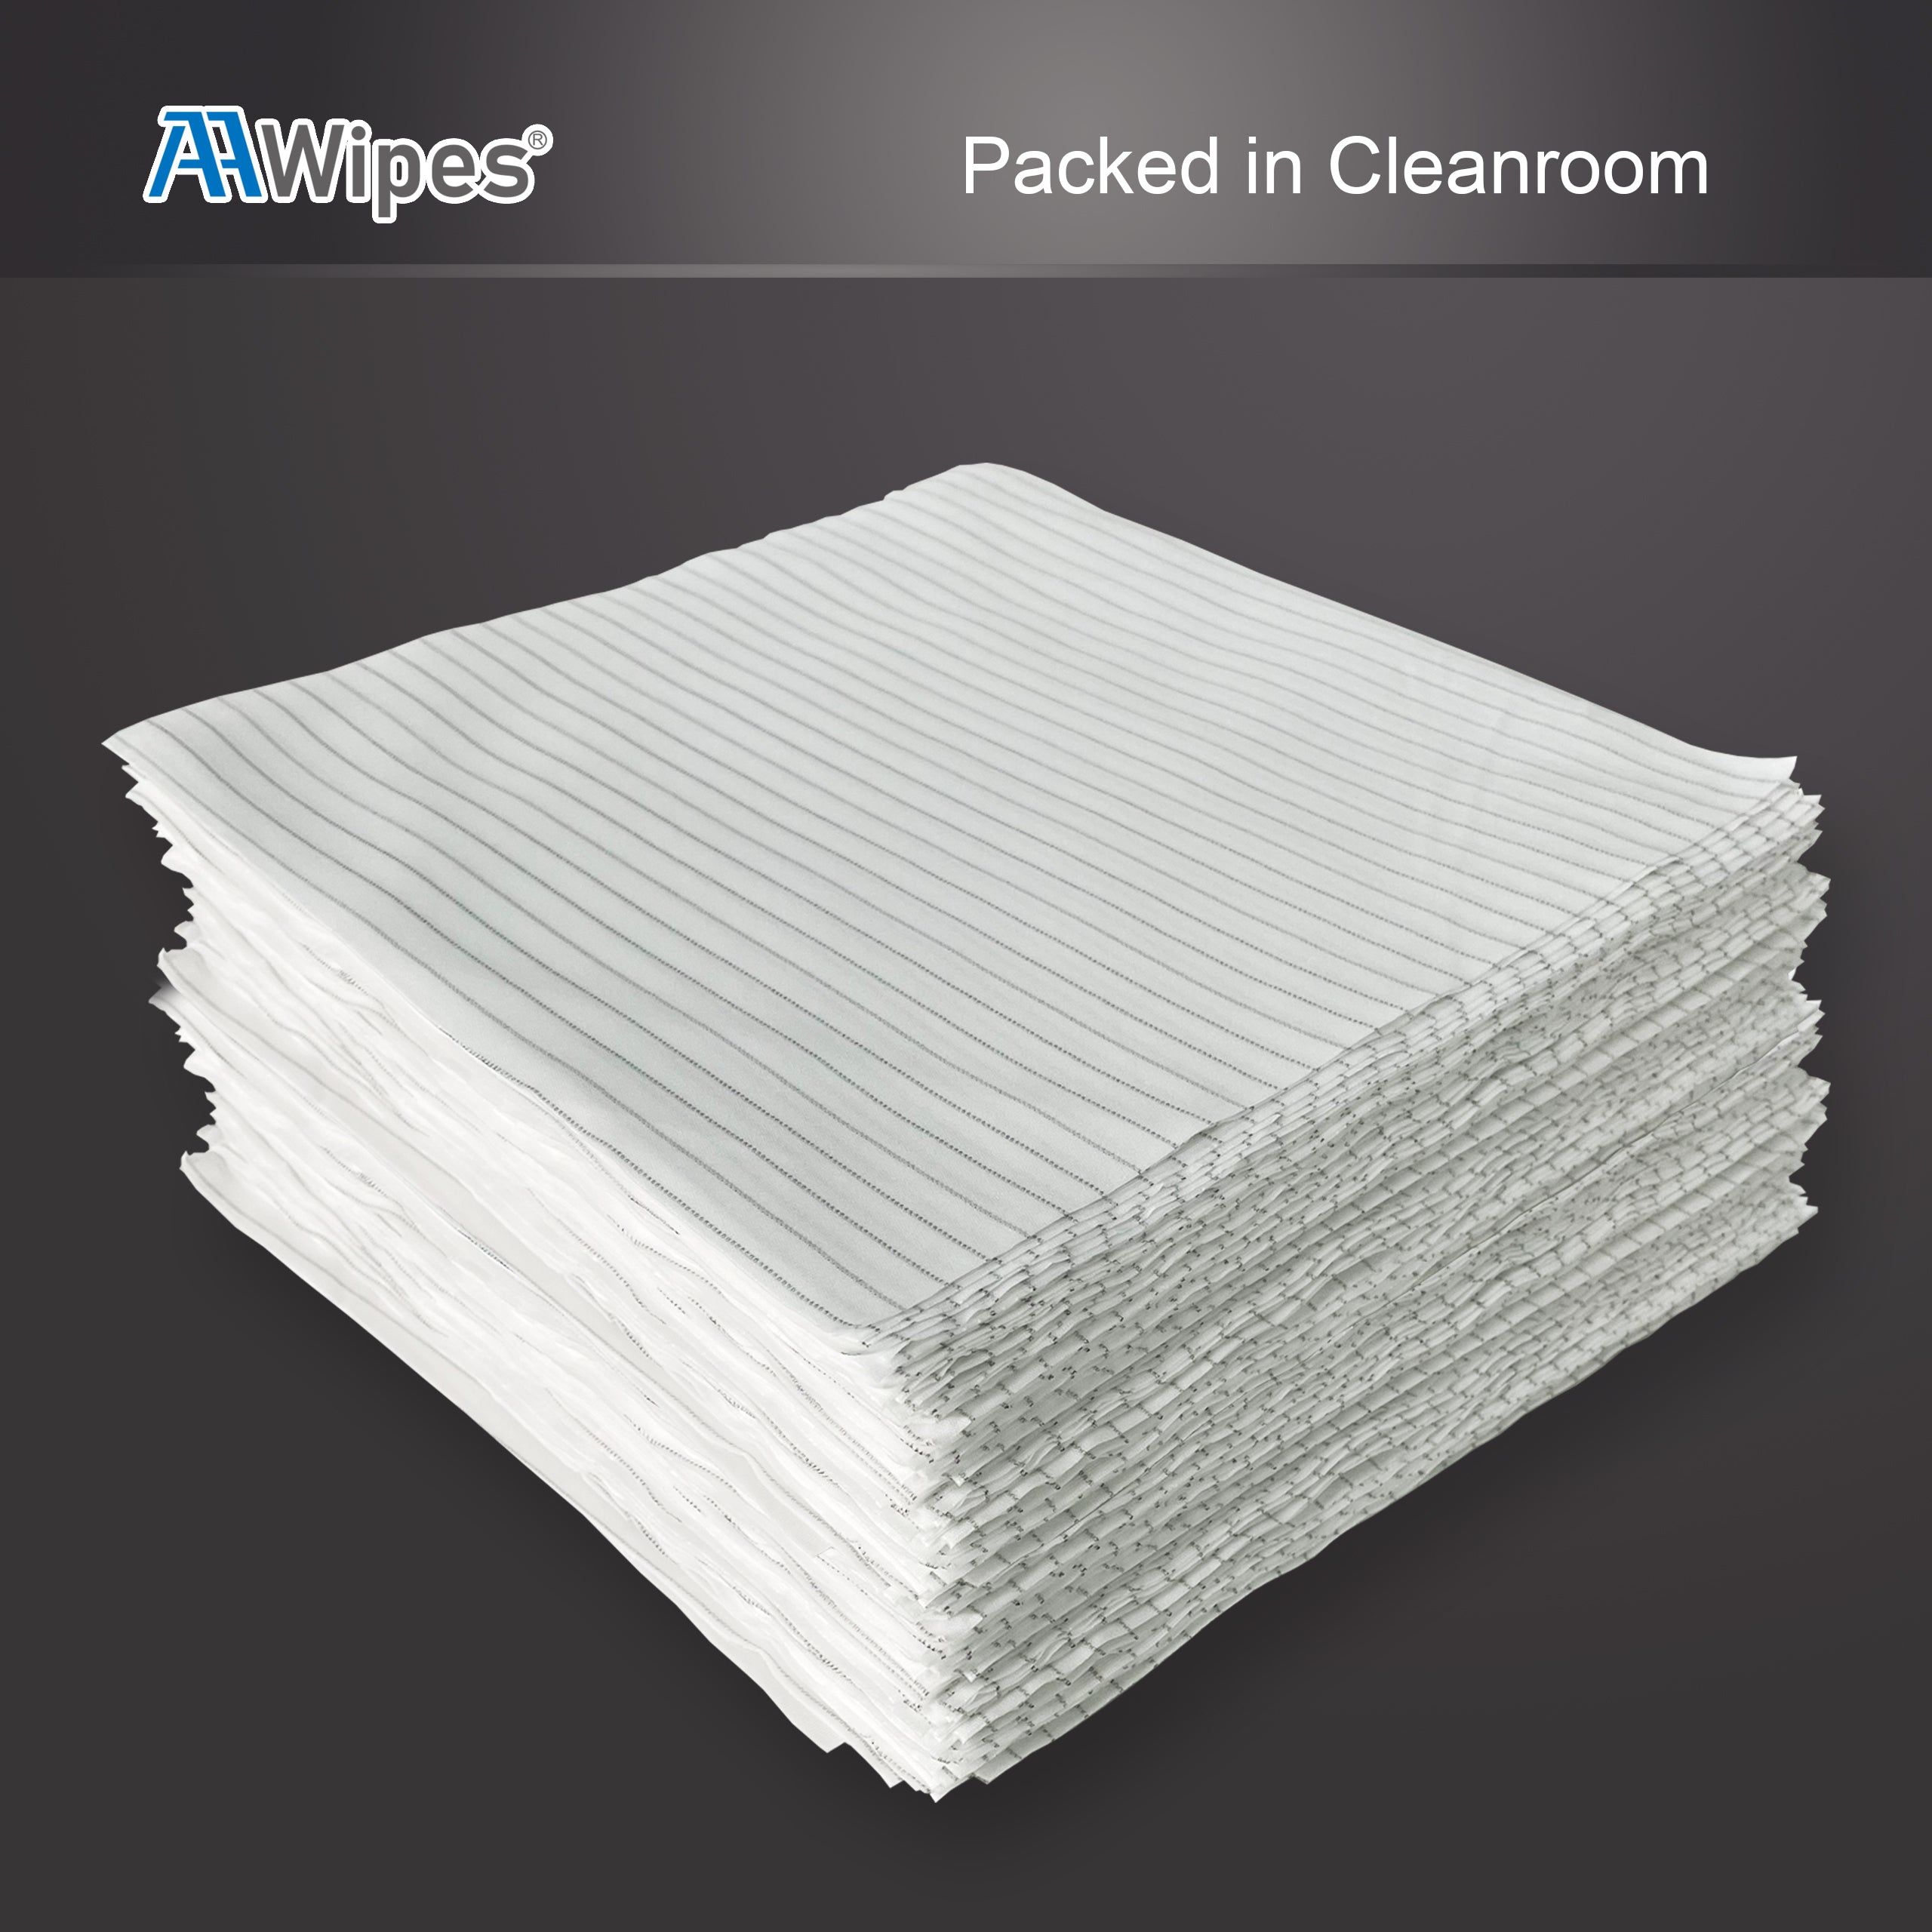 ESD-Safe Cleanroom Wipers: Lint-Free, Laser-Cut Edges, Class 100, 6"x6". Ideal for Optical Lens Cleaning in Clean Workshops. 4,000 Wipes/Box, 40 Bags (No. CE16006).